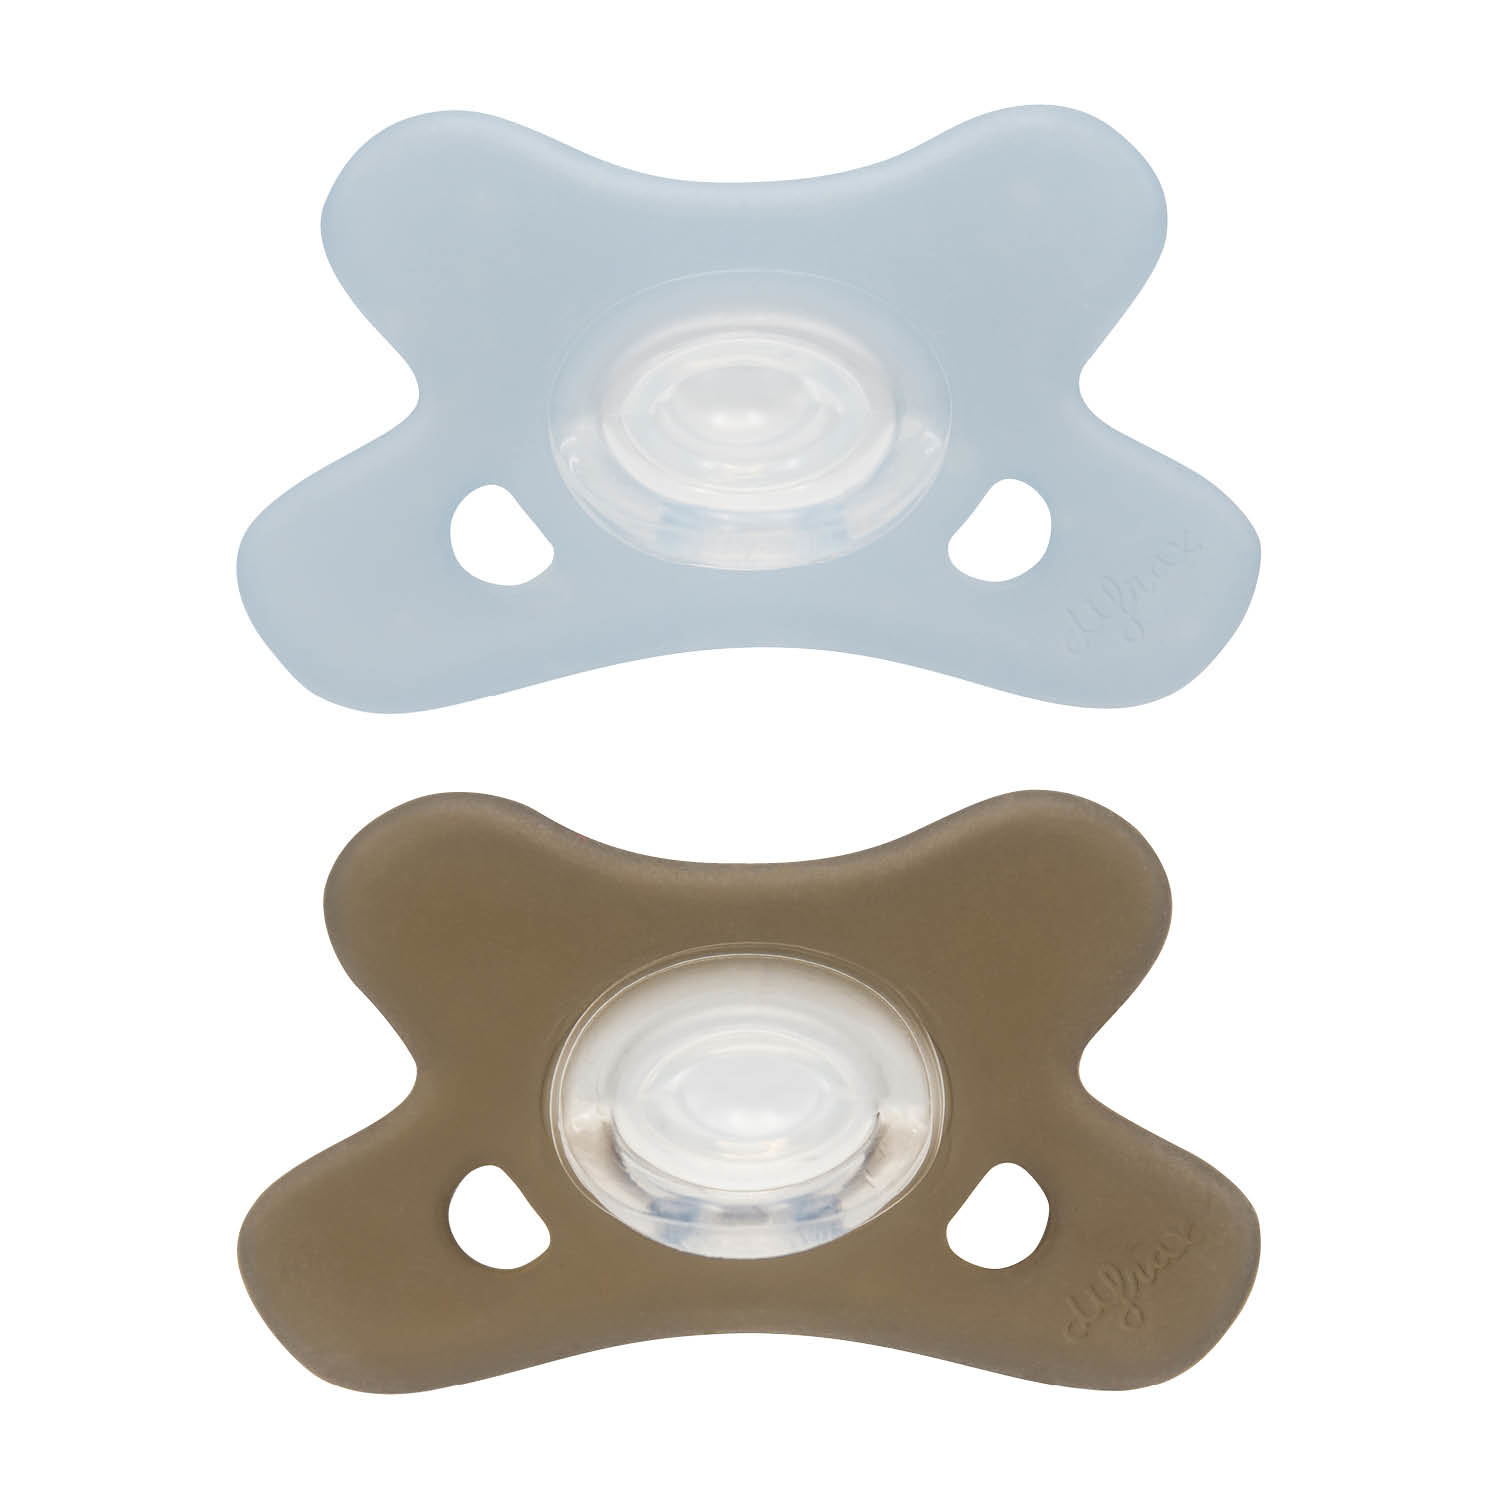 Difrax Sucette 0-6 Silicone Set Of 2 Blue / Grey 